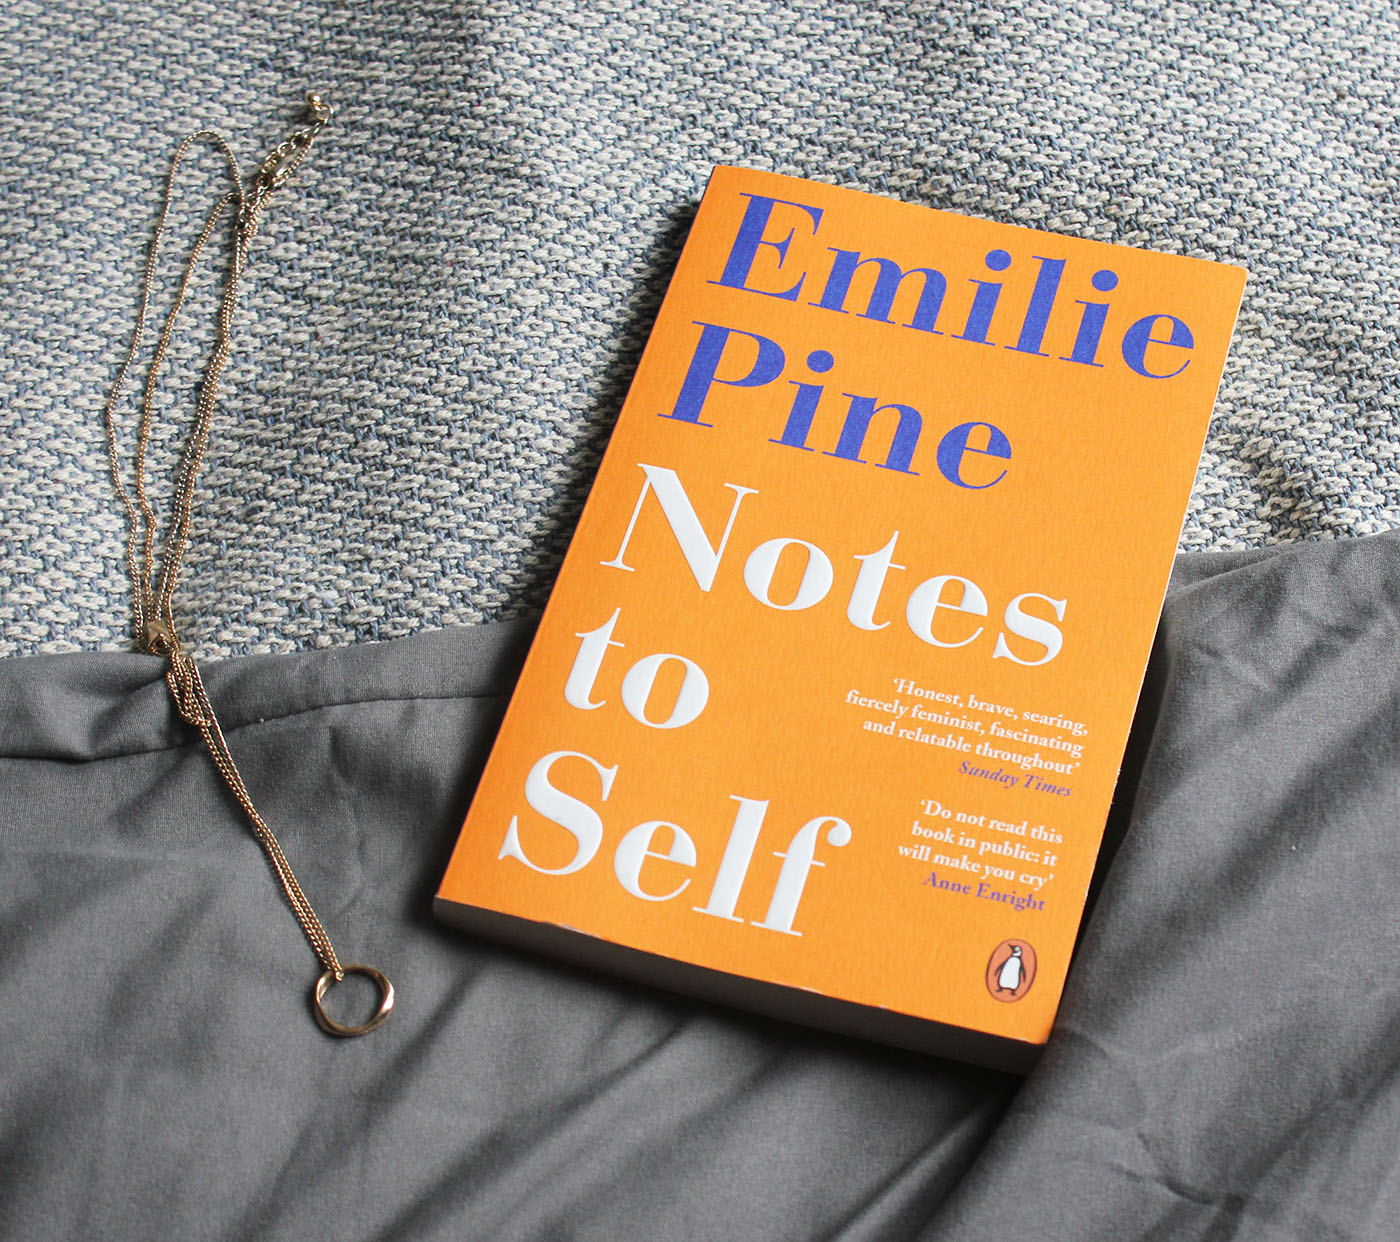 Emilie Pine Notes to Self